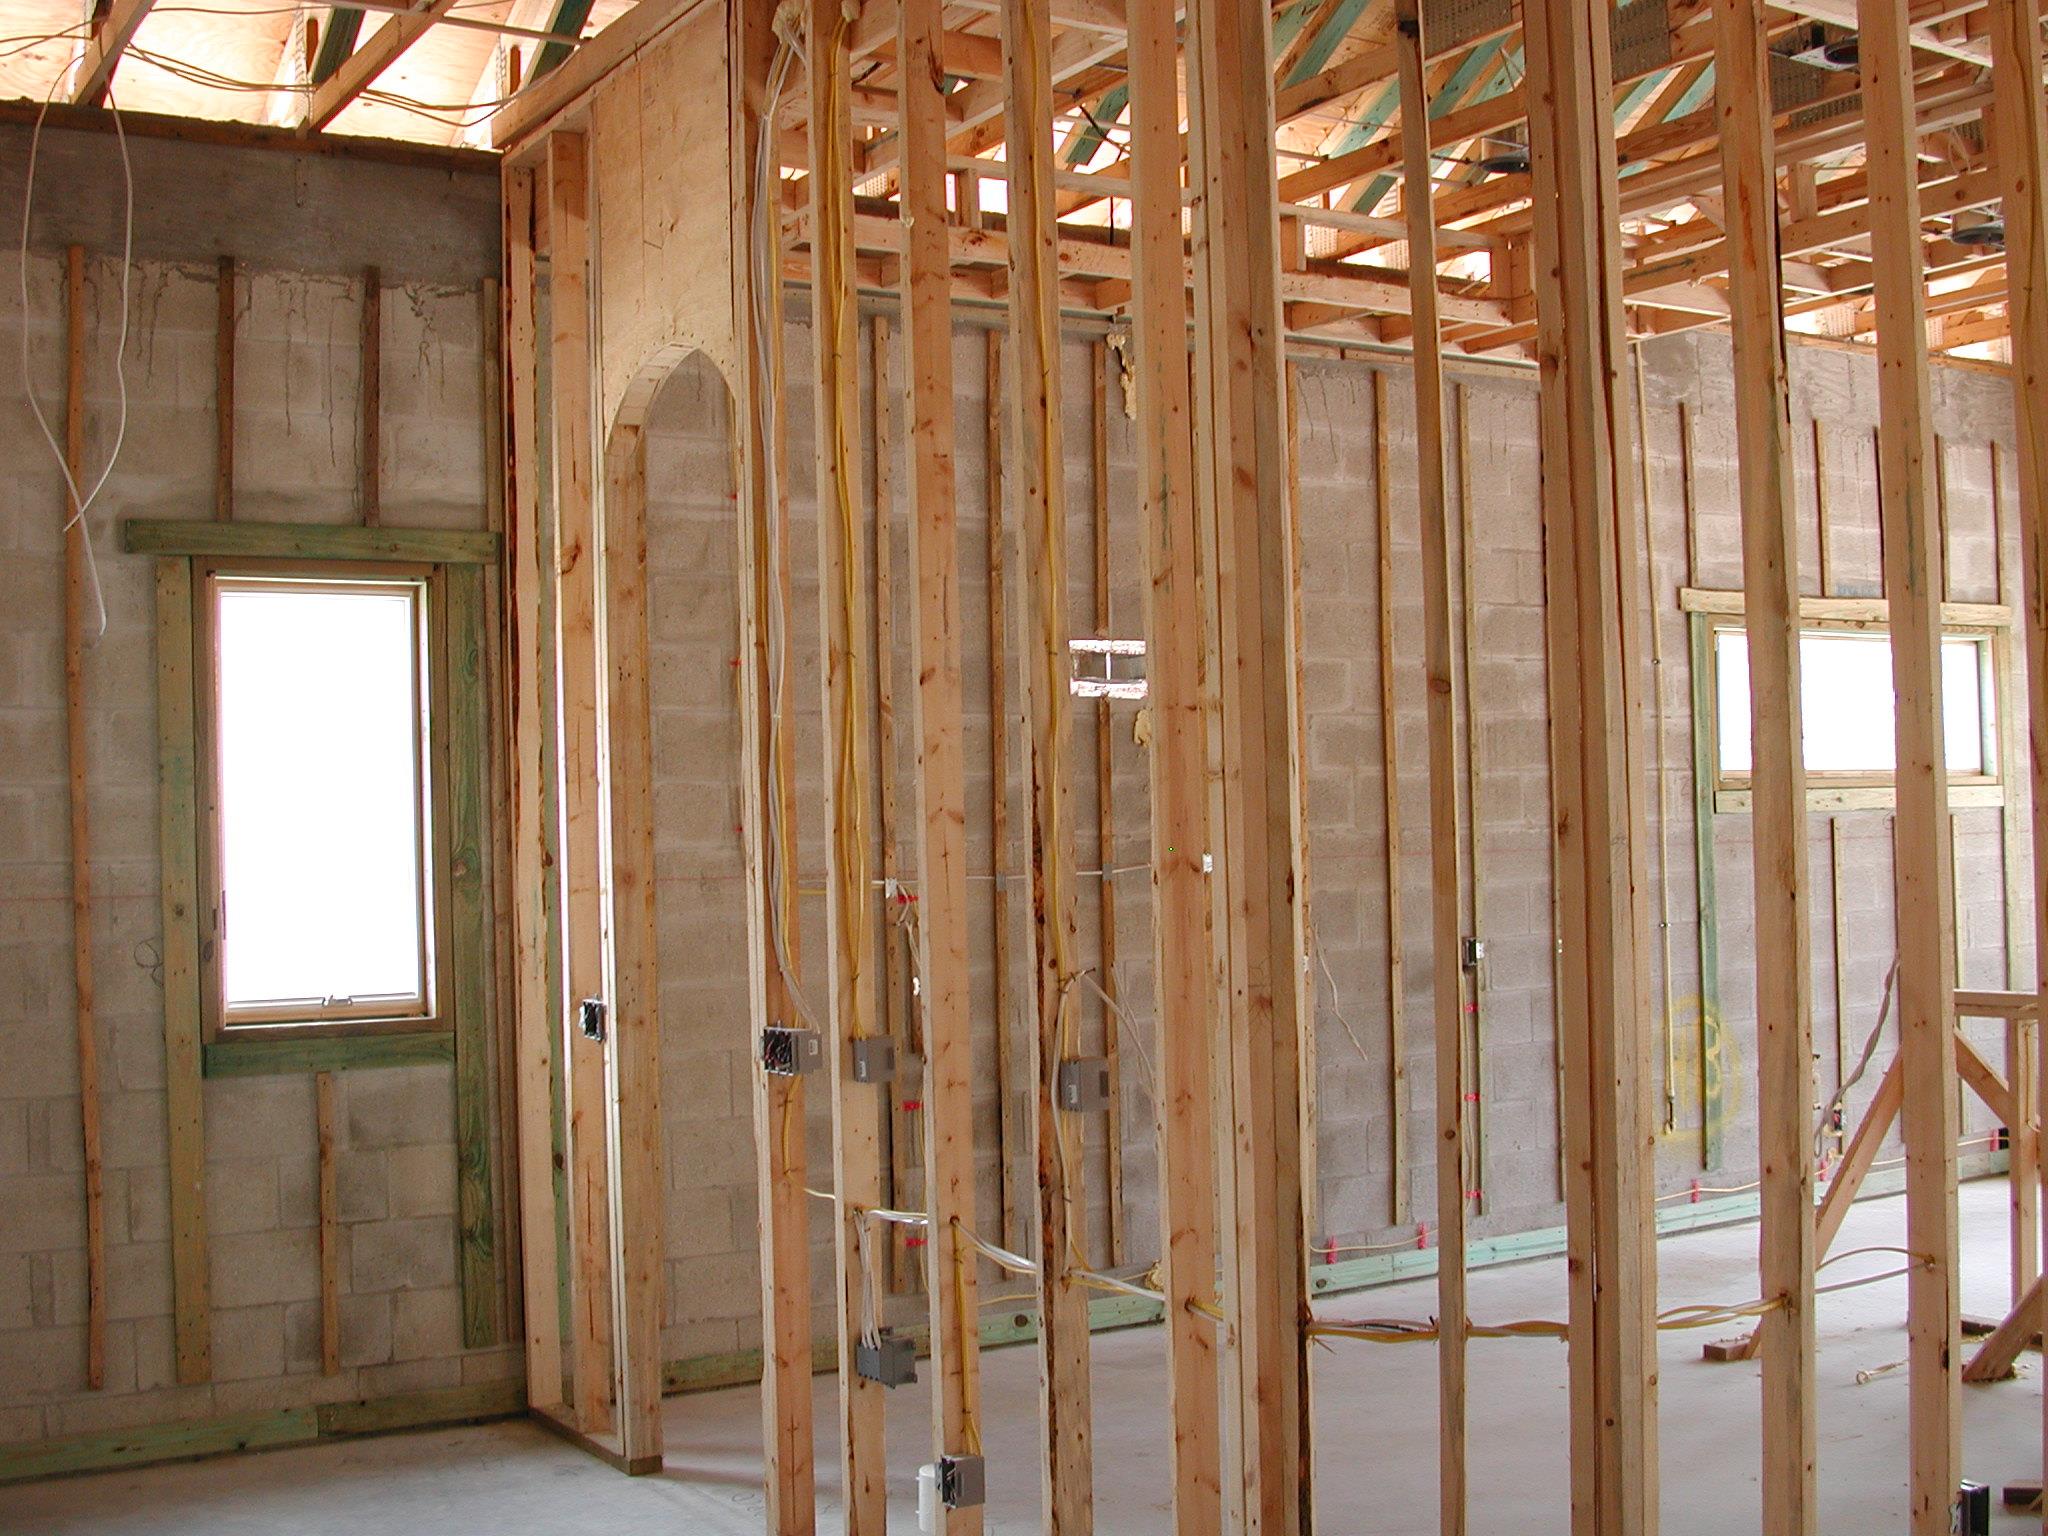 Interior studs prior to drywall application